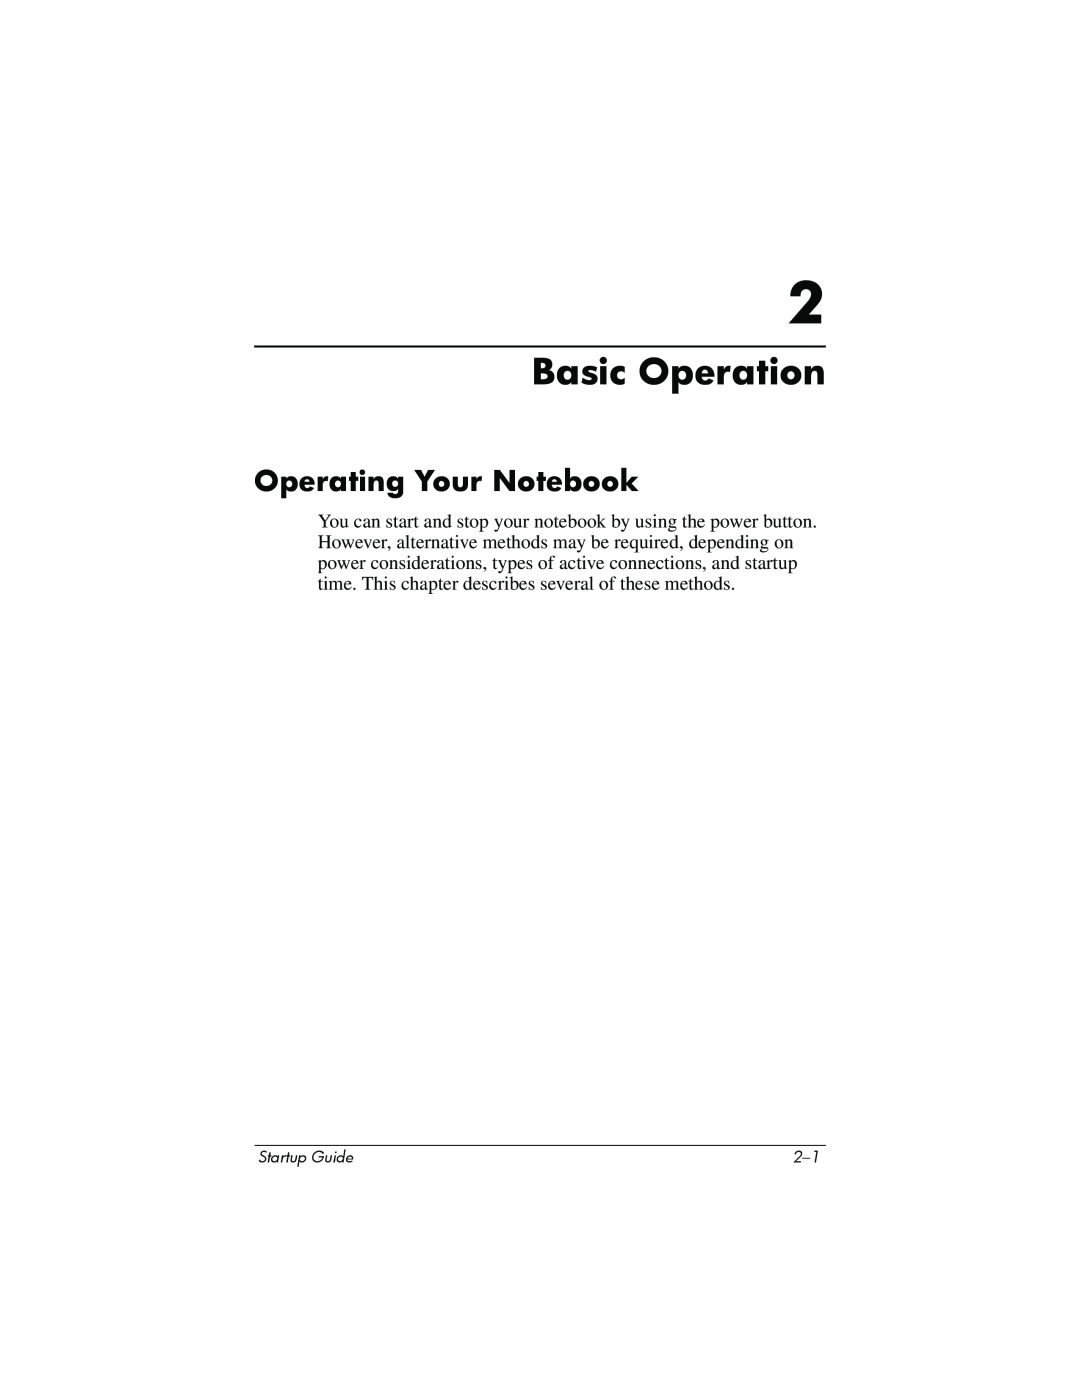 Compaq Personal Computer manual Basic Operation, Operating Your Notebook, Startup Guide 